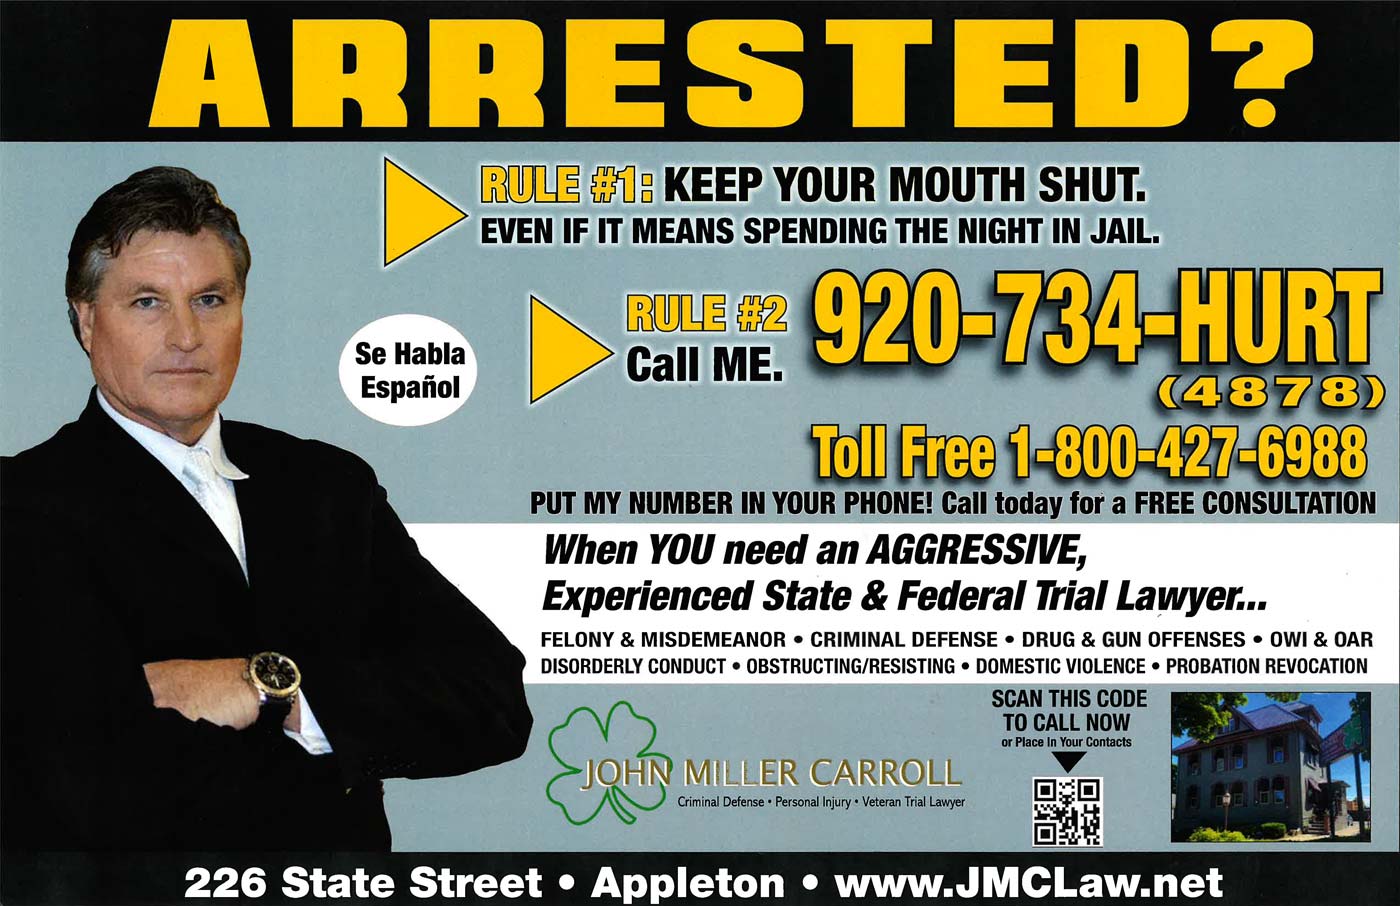 Arrested? Keep your mouth shut and call lawyer John Miller Carroll toll free at 1-800-427-6988